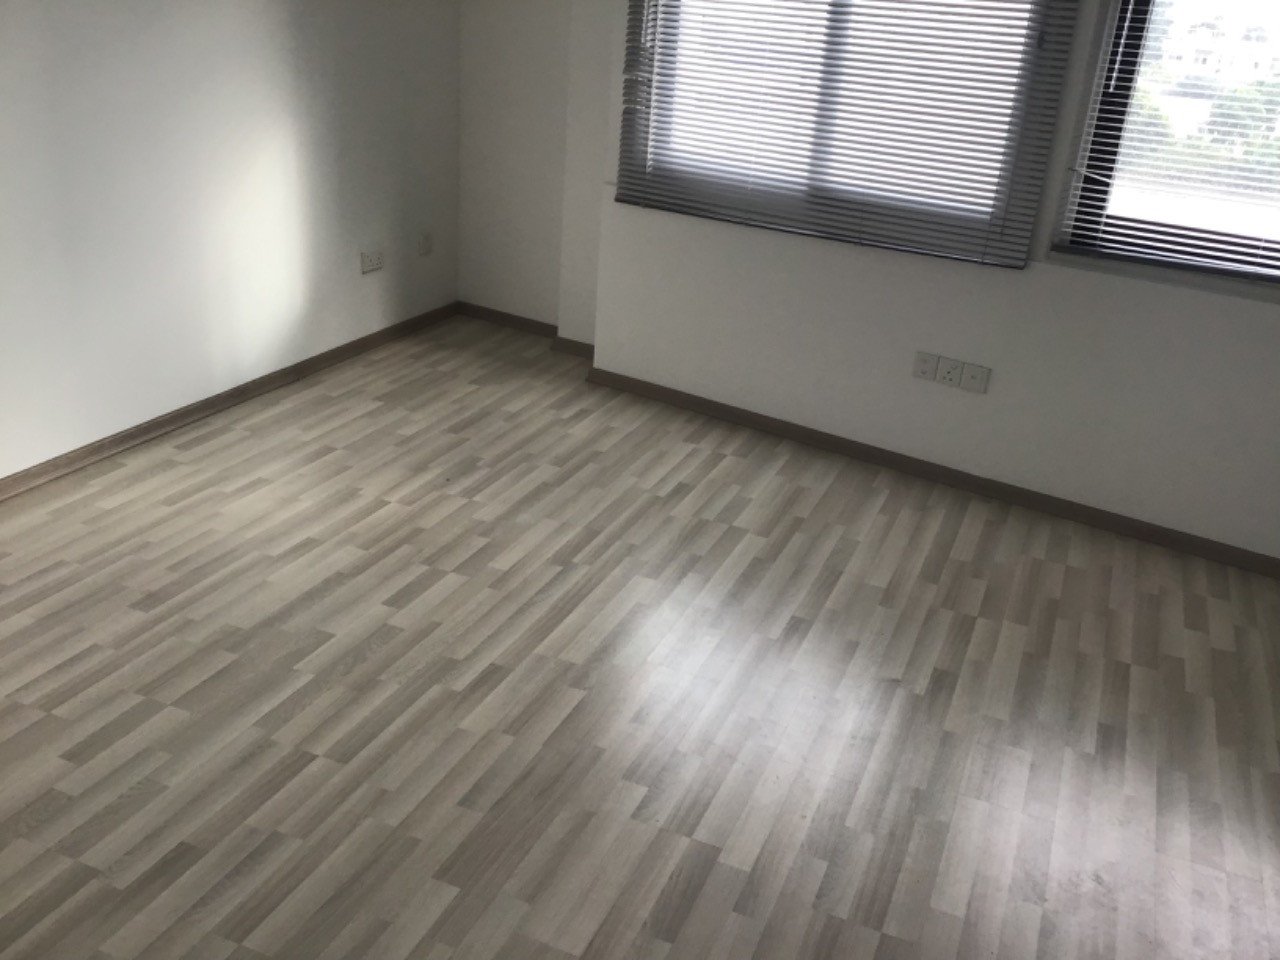 Property for Rent: Commercial (Office) in Latsia, Nicosia for Rent | Key Realtor Cyprus